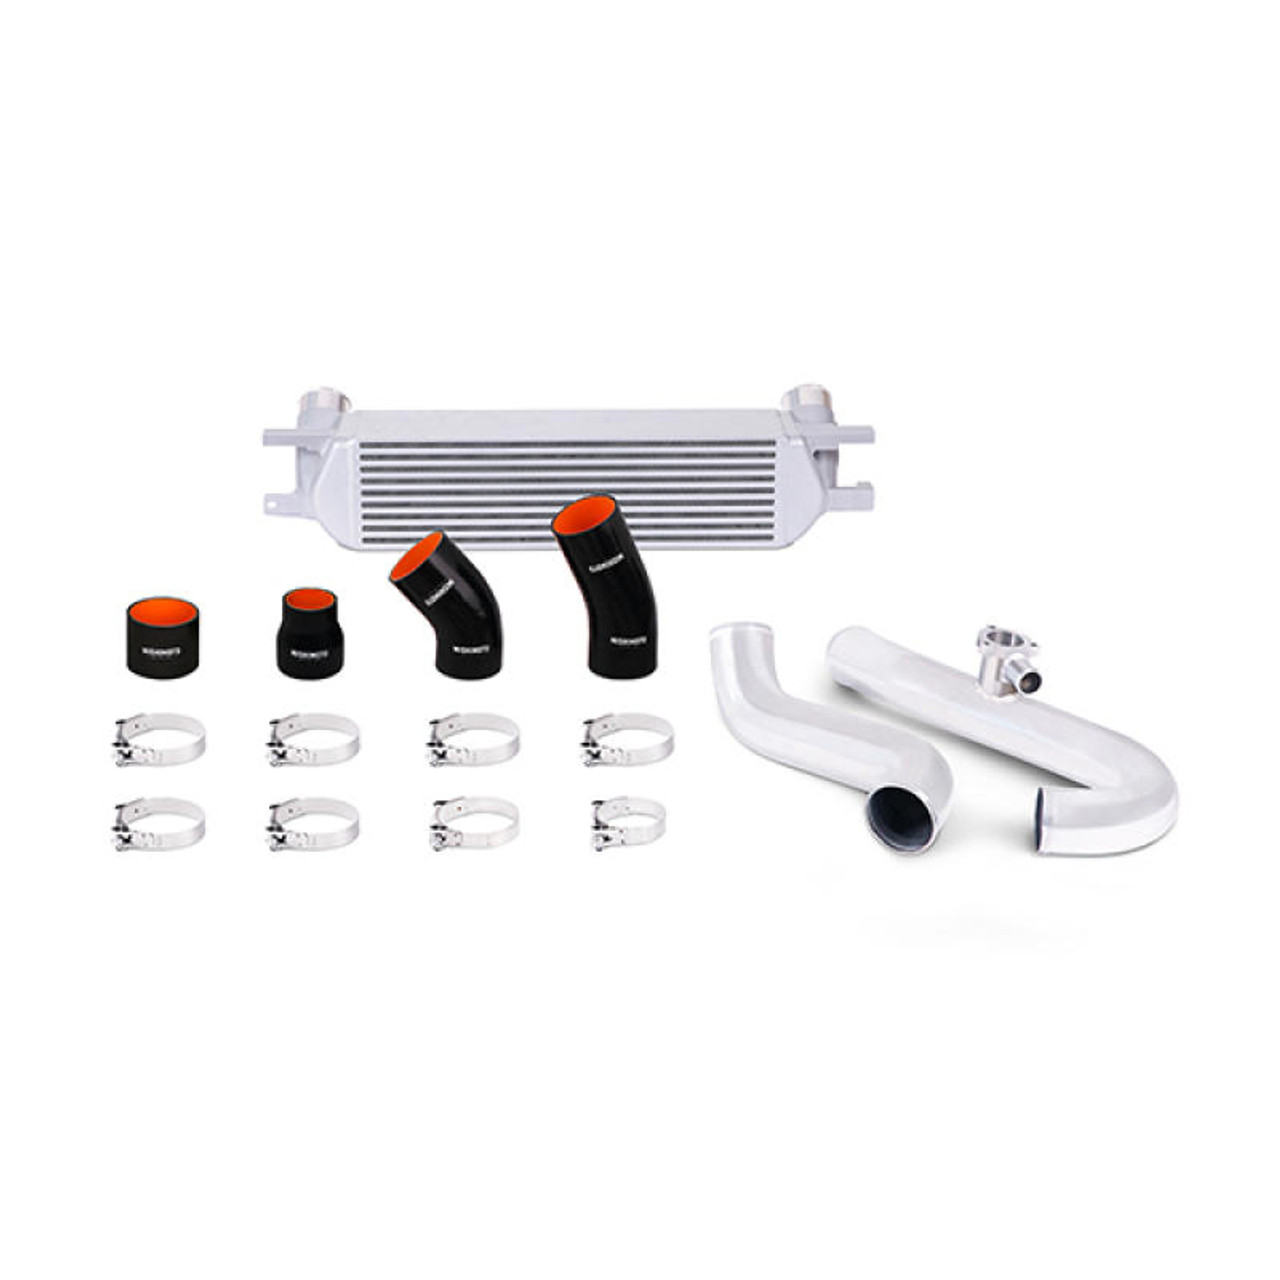 Mishimoto 2015 Ford Mustang EcoBoost Performance Intercooler Kit - Silver Core Polished Pipes - MMINT-MUS4-15KPSL